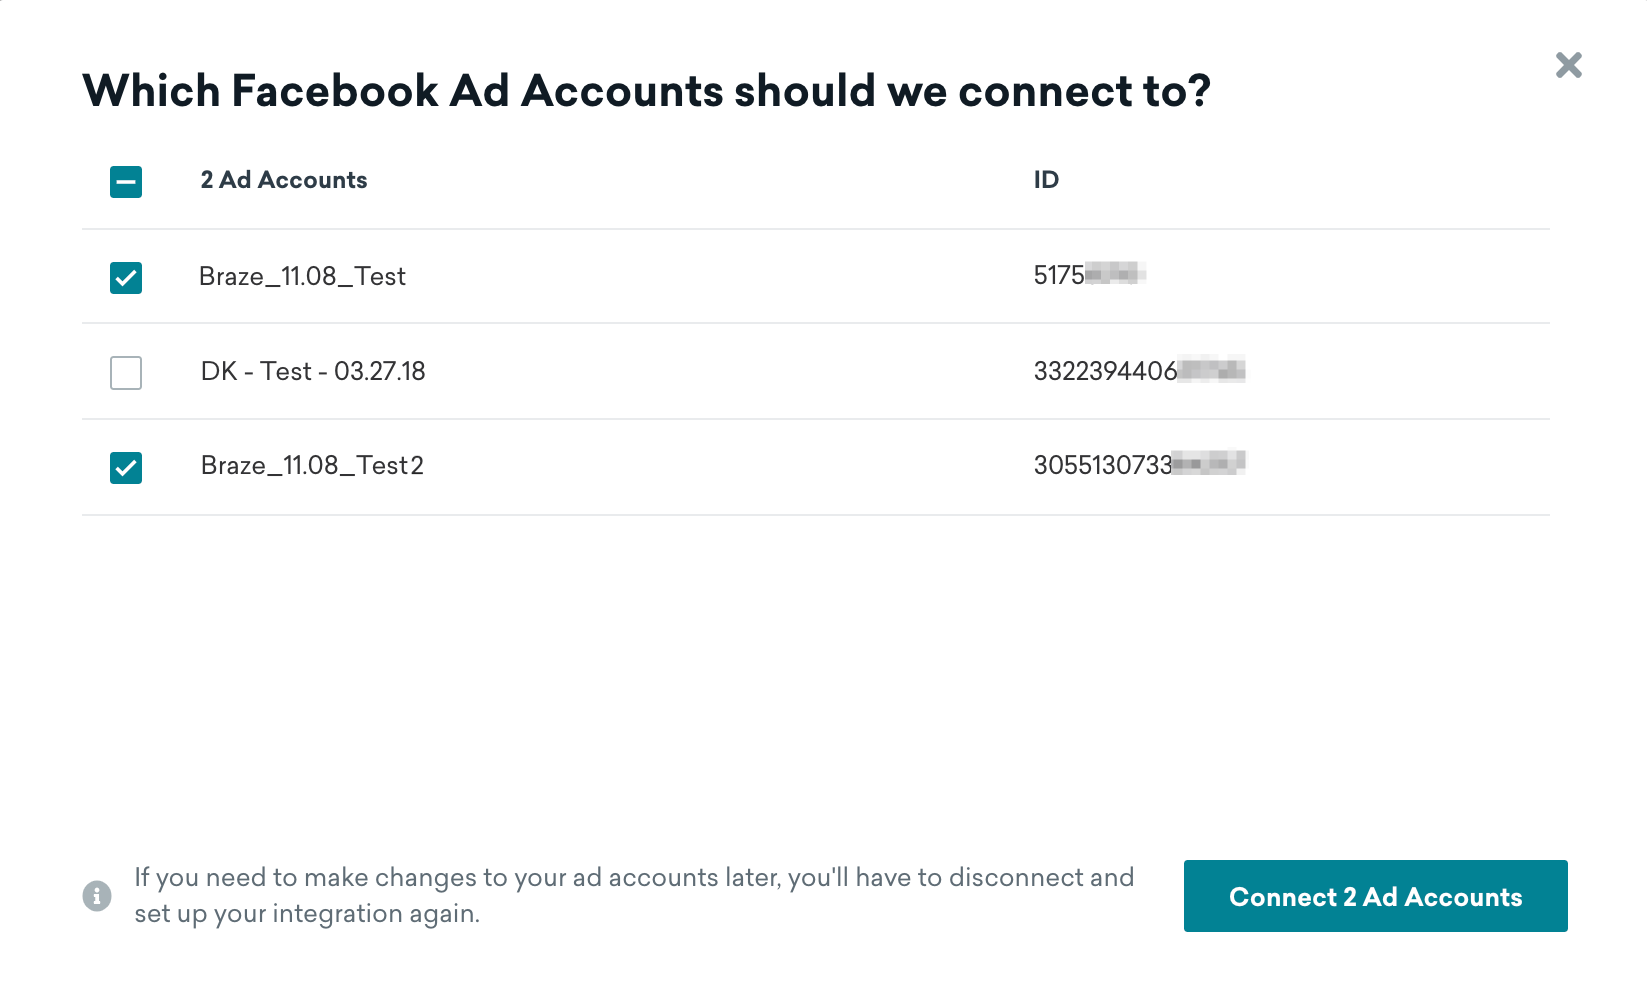 A list of available ad accounts you can connect to Facebook.